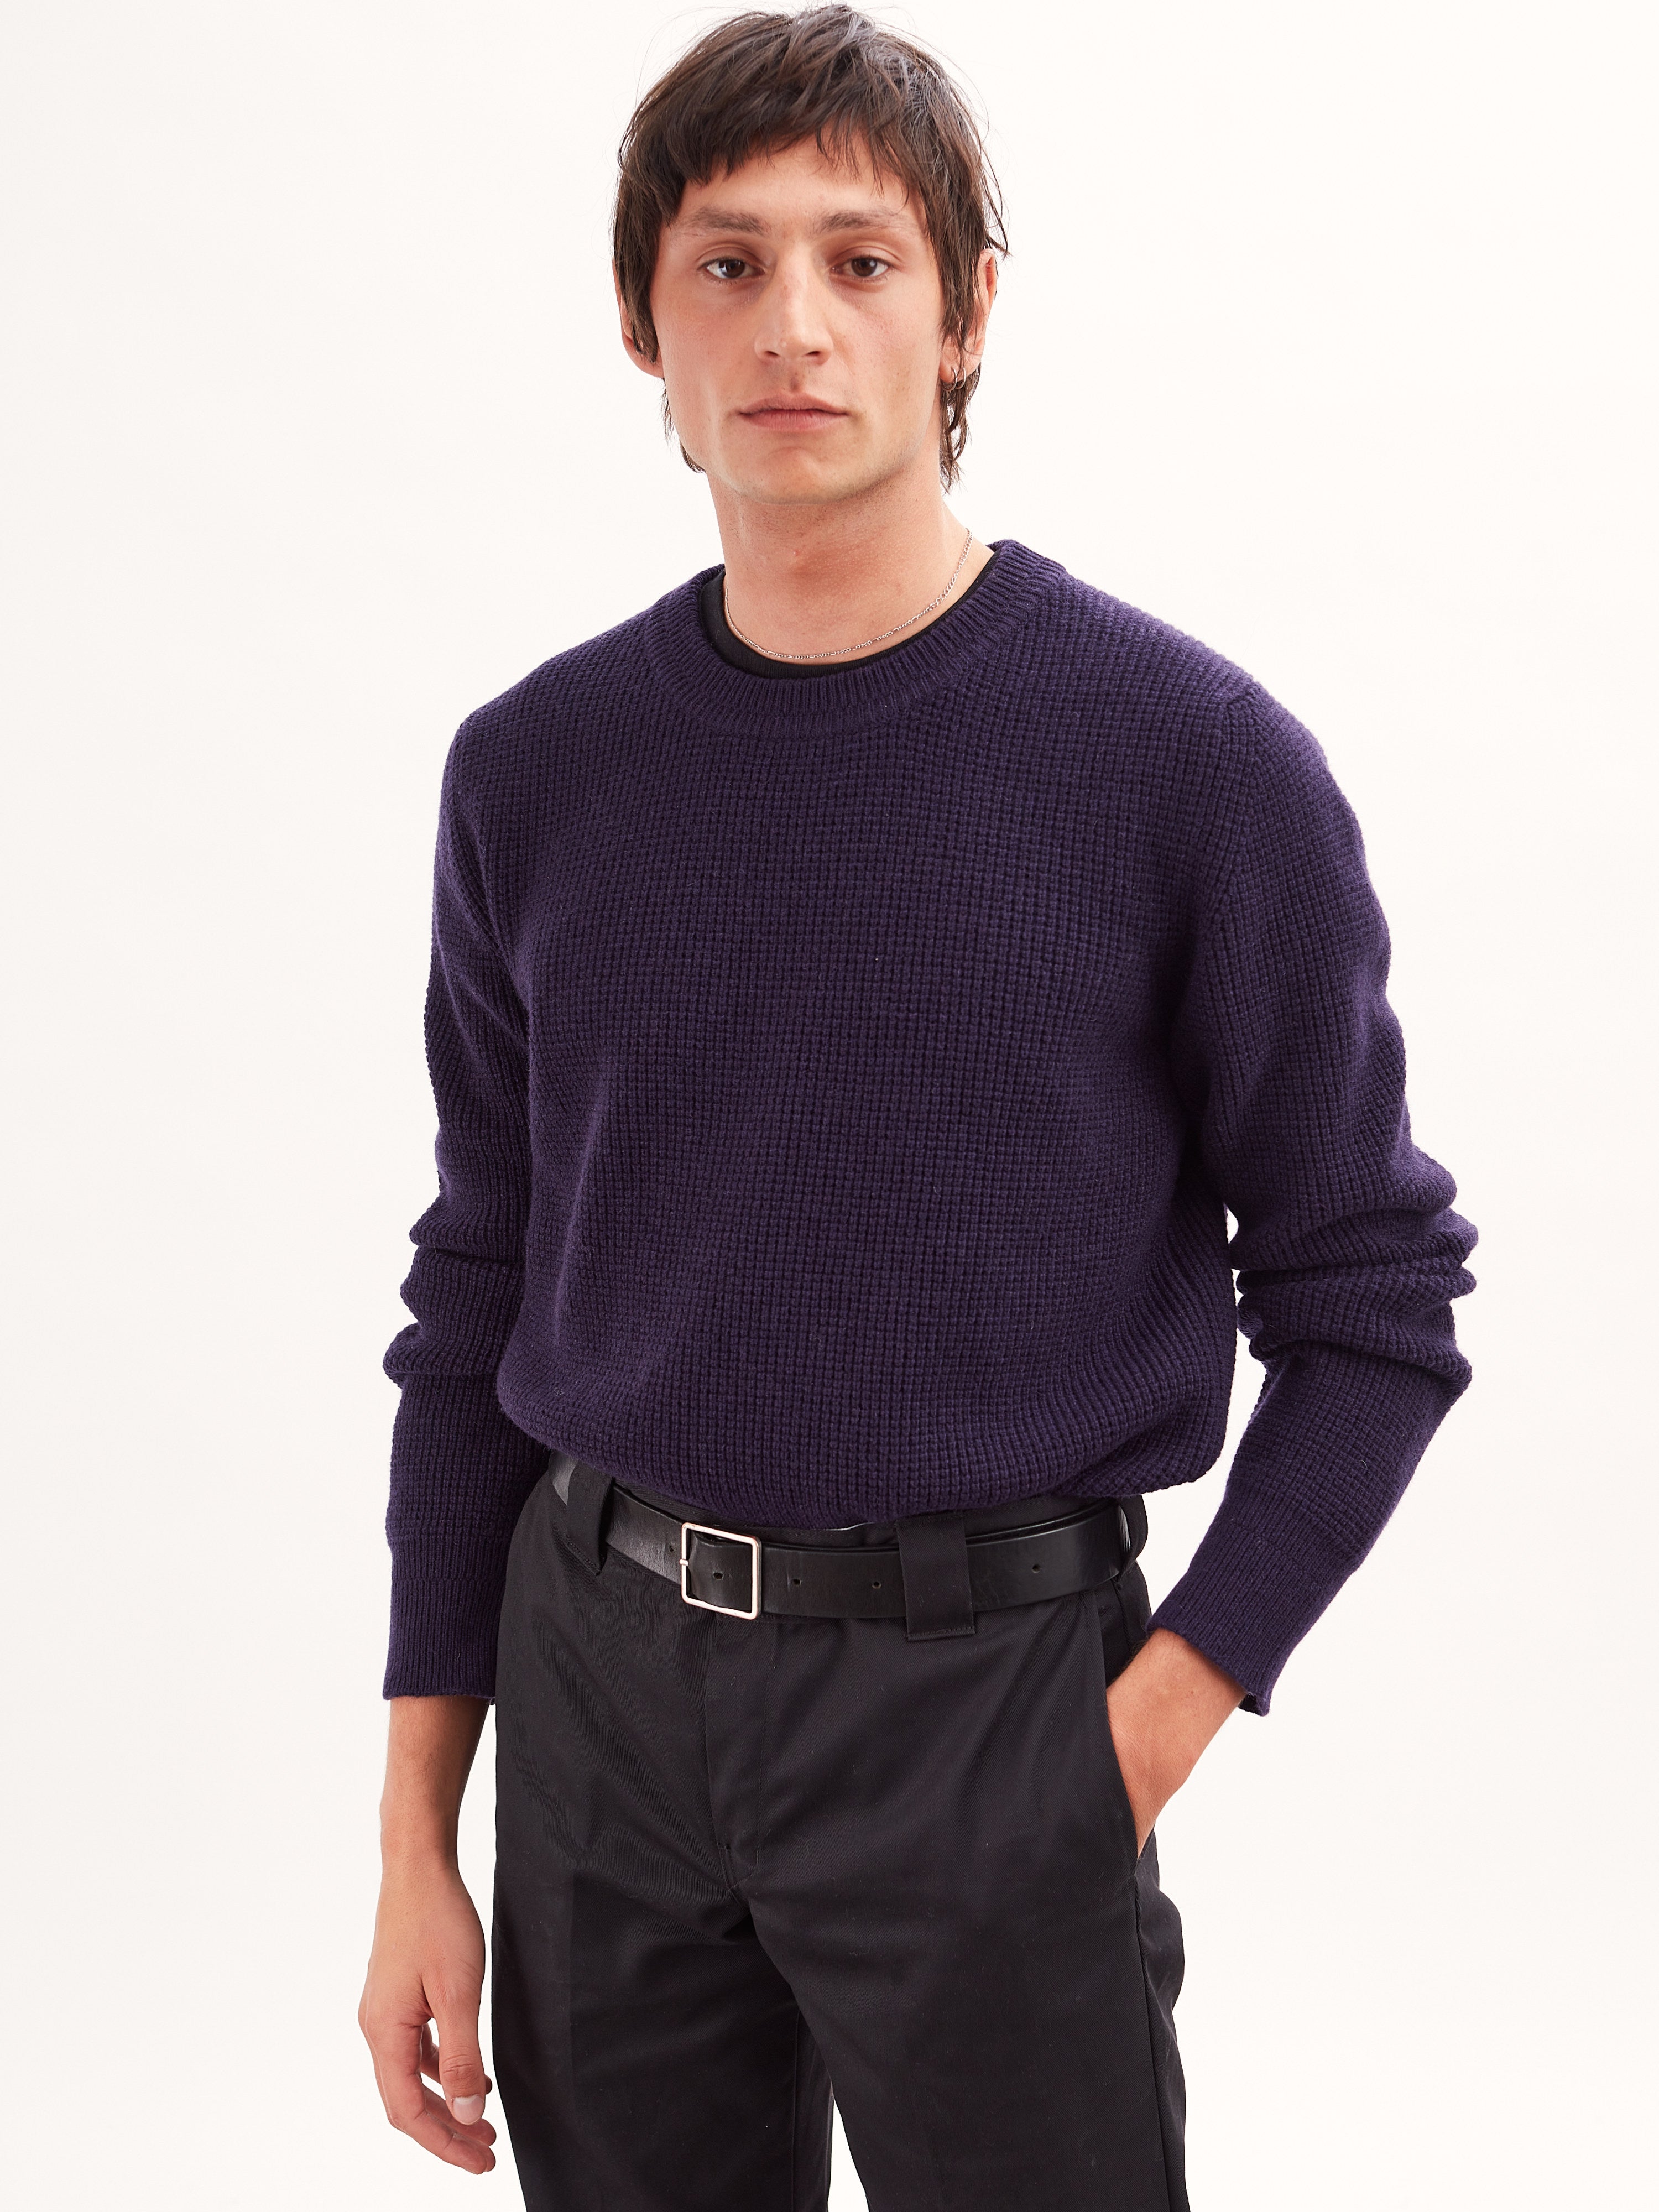 Crewneck wool & Cashmere recycled plum for men